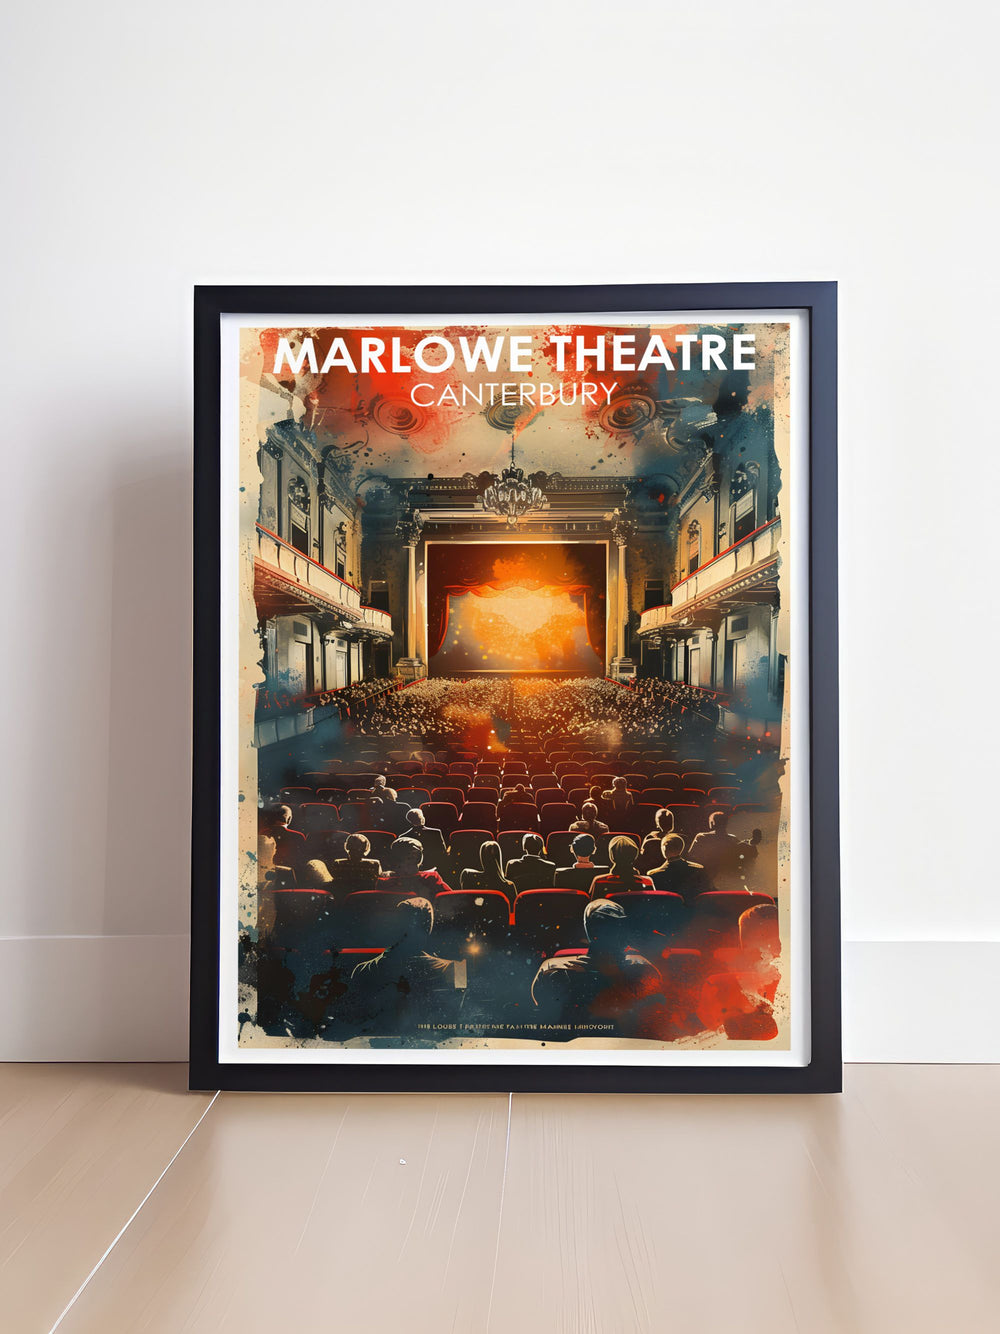 Featuring the iconic Marlowe Theatre, this poster offers a visual representation of one of Englands most beloved cultural venues, ideal for theatre lovers and art enthusiasts.